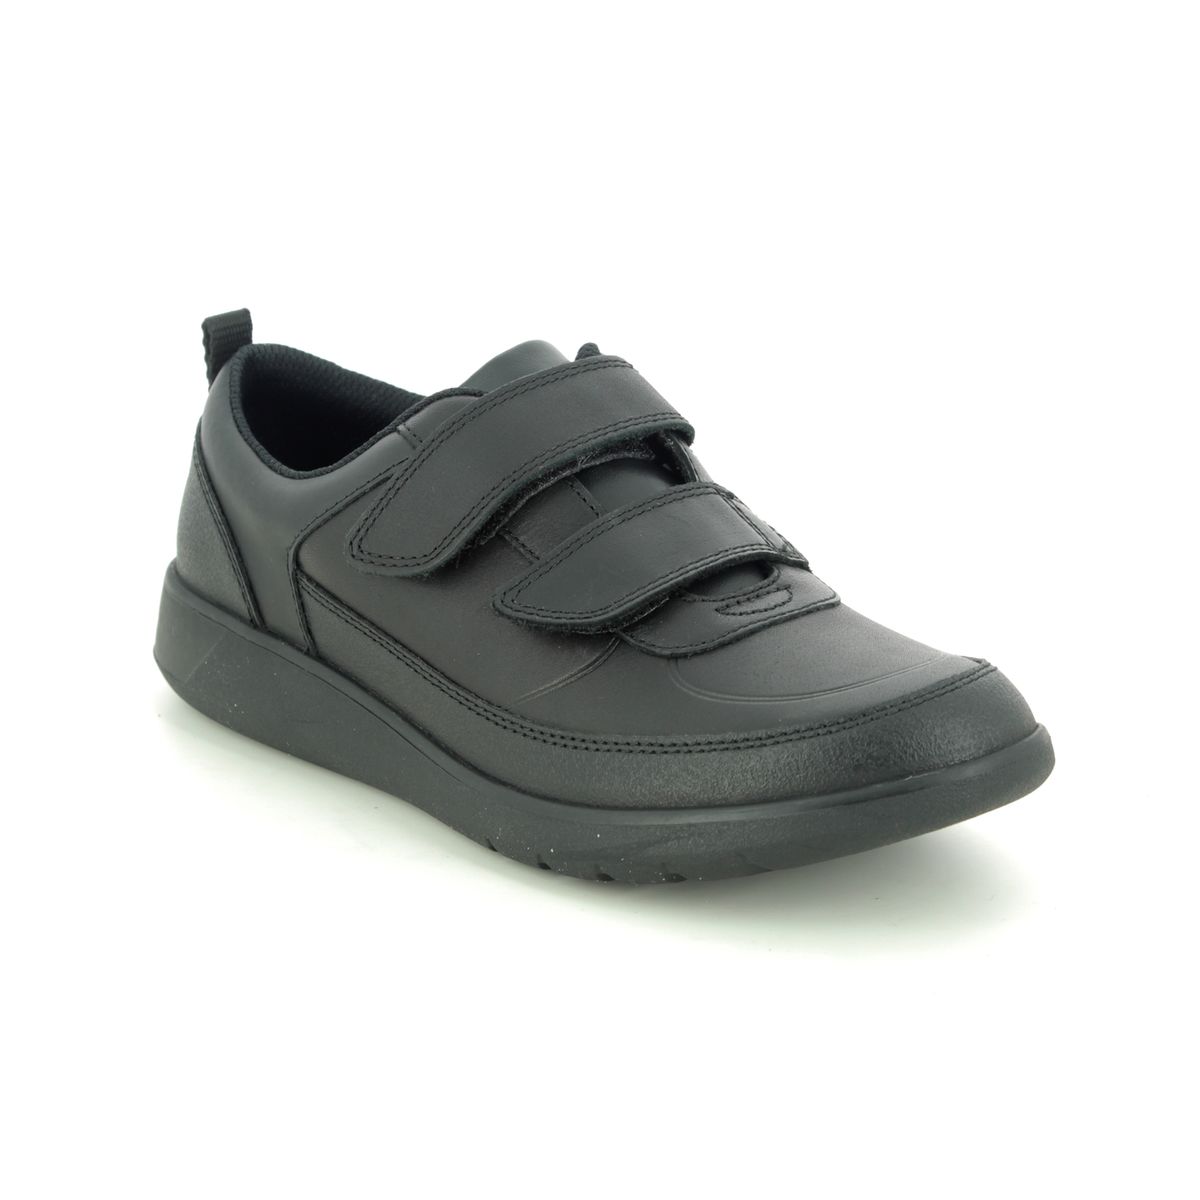 Clarks Scape Flare Y Black Leather Kids Boys Shoes 494098H In Size 6 In Plain Black Leather H Width Fitting Extra Wide For School For kids